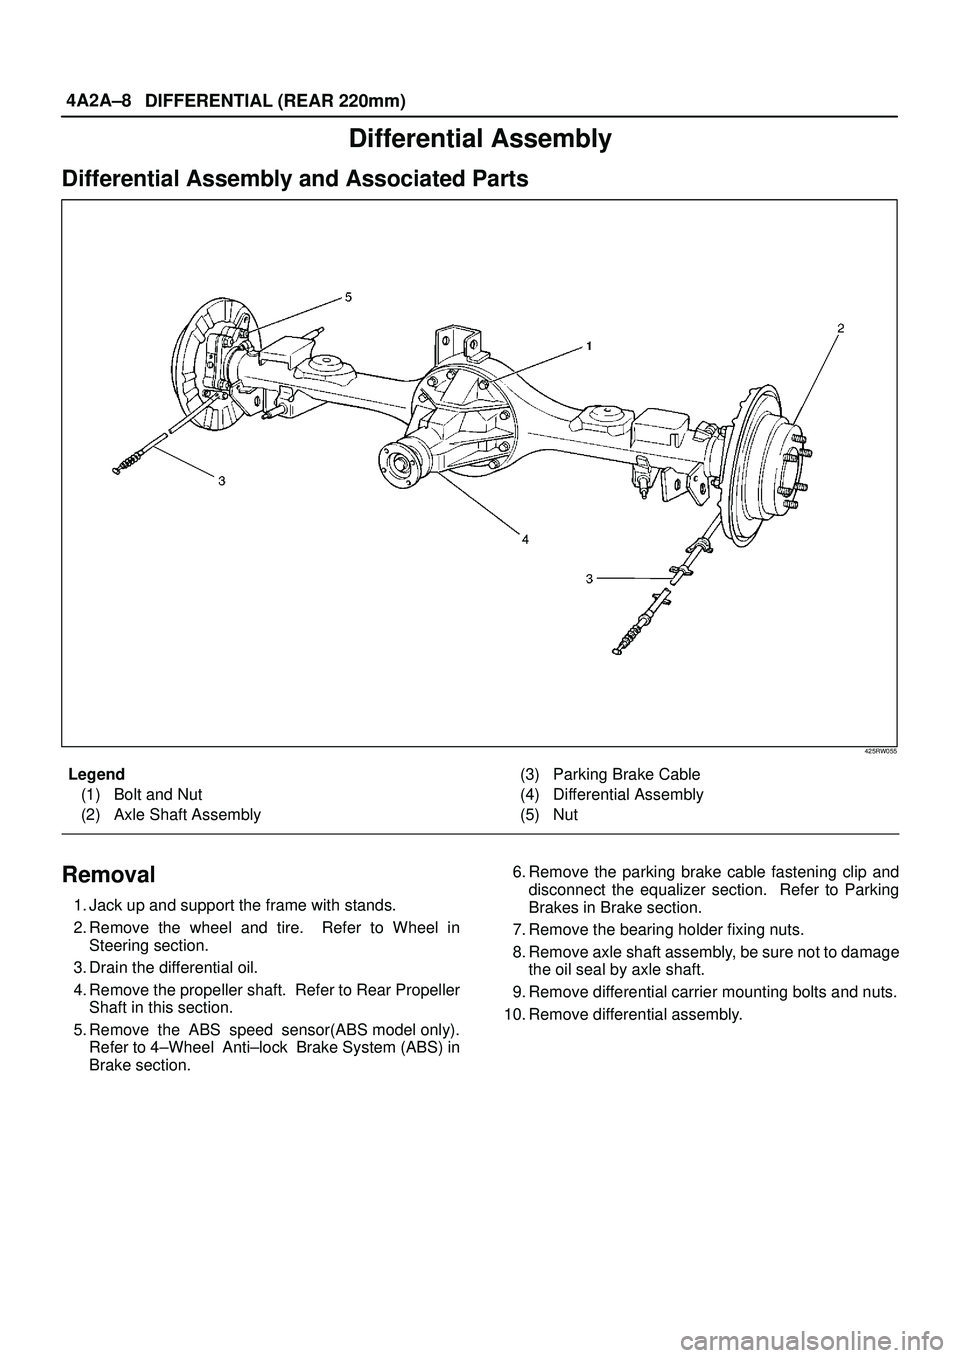 ISUZU TROOPER 1998  Service Repair Manual 4A2A±8
DIFFERENTIAL (REAR 220mm)
Differential Assembly
Differential Assembly and Associated Parts
425RW055
Legend
(1) Bolt and Nut
(2) Axle Shaft Assembly(3) Parking Brake Cable
(4) Differential Asse